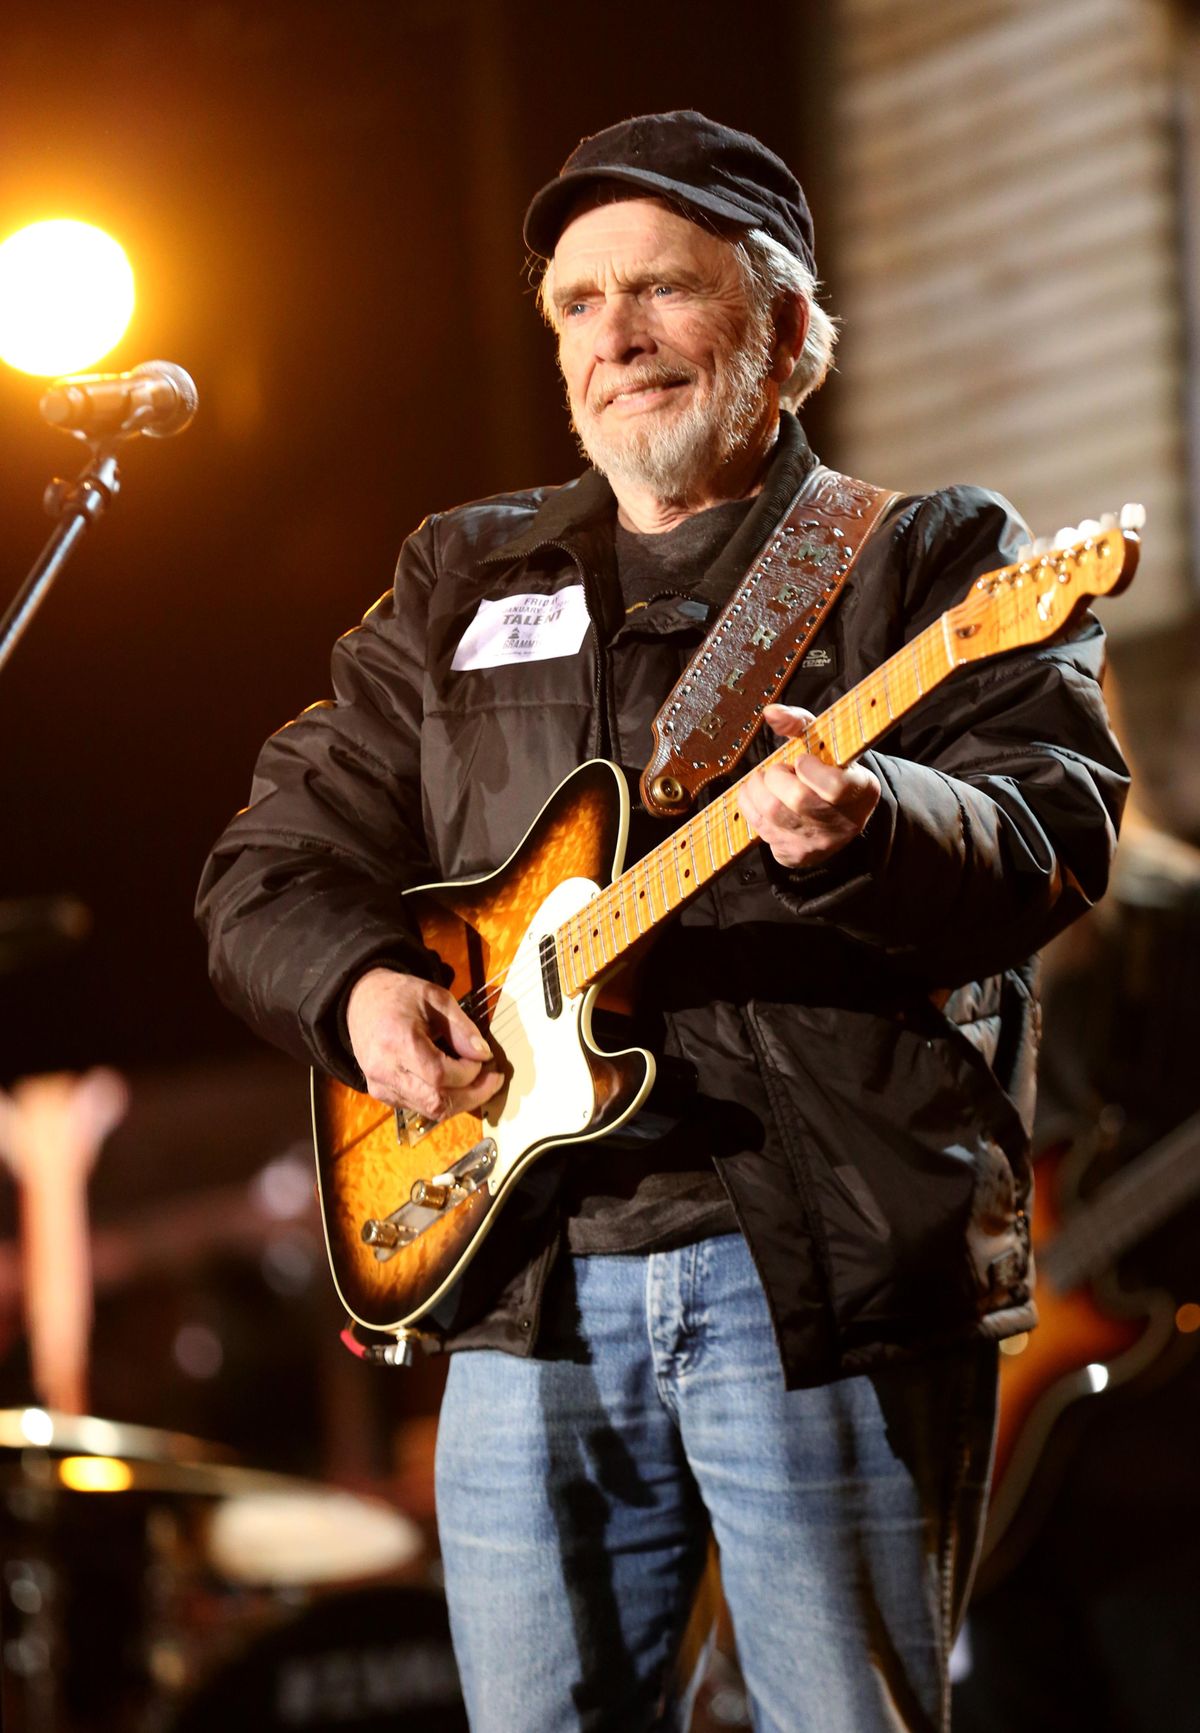 FILE - This Jan. 24, 2014 file photo shows country singer Merle Haggard during a rehearsal for the 56th Annual Grammy Awards in Los Angeles. Haggard died of pneumonia, Wednesday, April 6, 2016, in Palo Cedro, Calif. He was 79. (Photo by Matt Sayles/Invision/AP, File) ORG XMIT: NYET311 (Matt Sayles / Matt Sayles/Invision/AP)